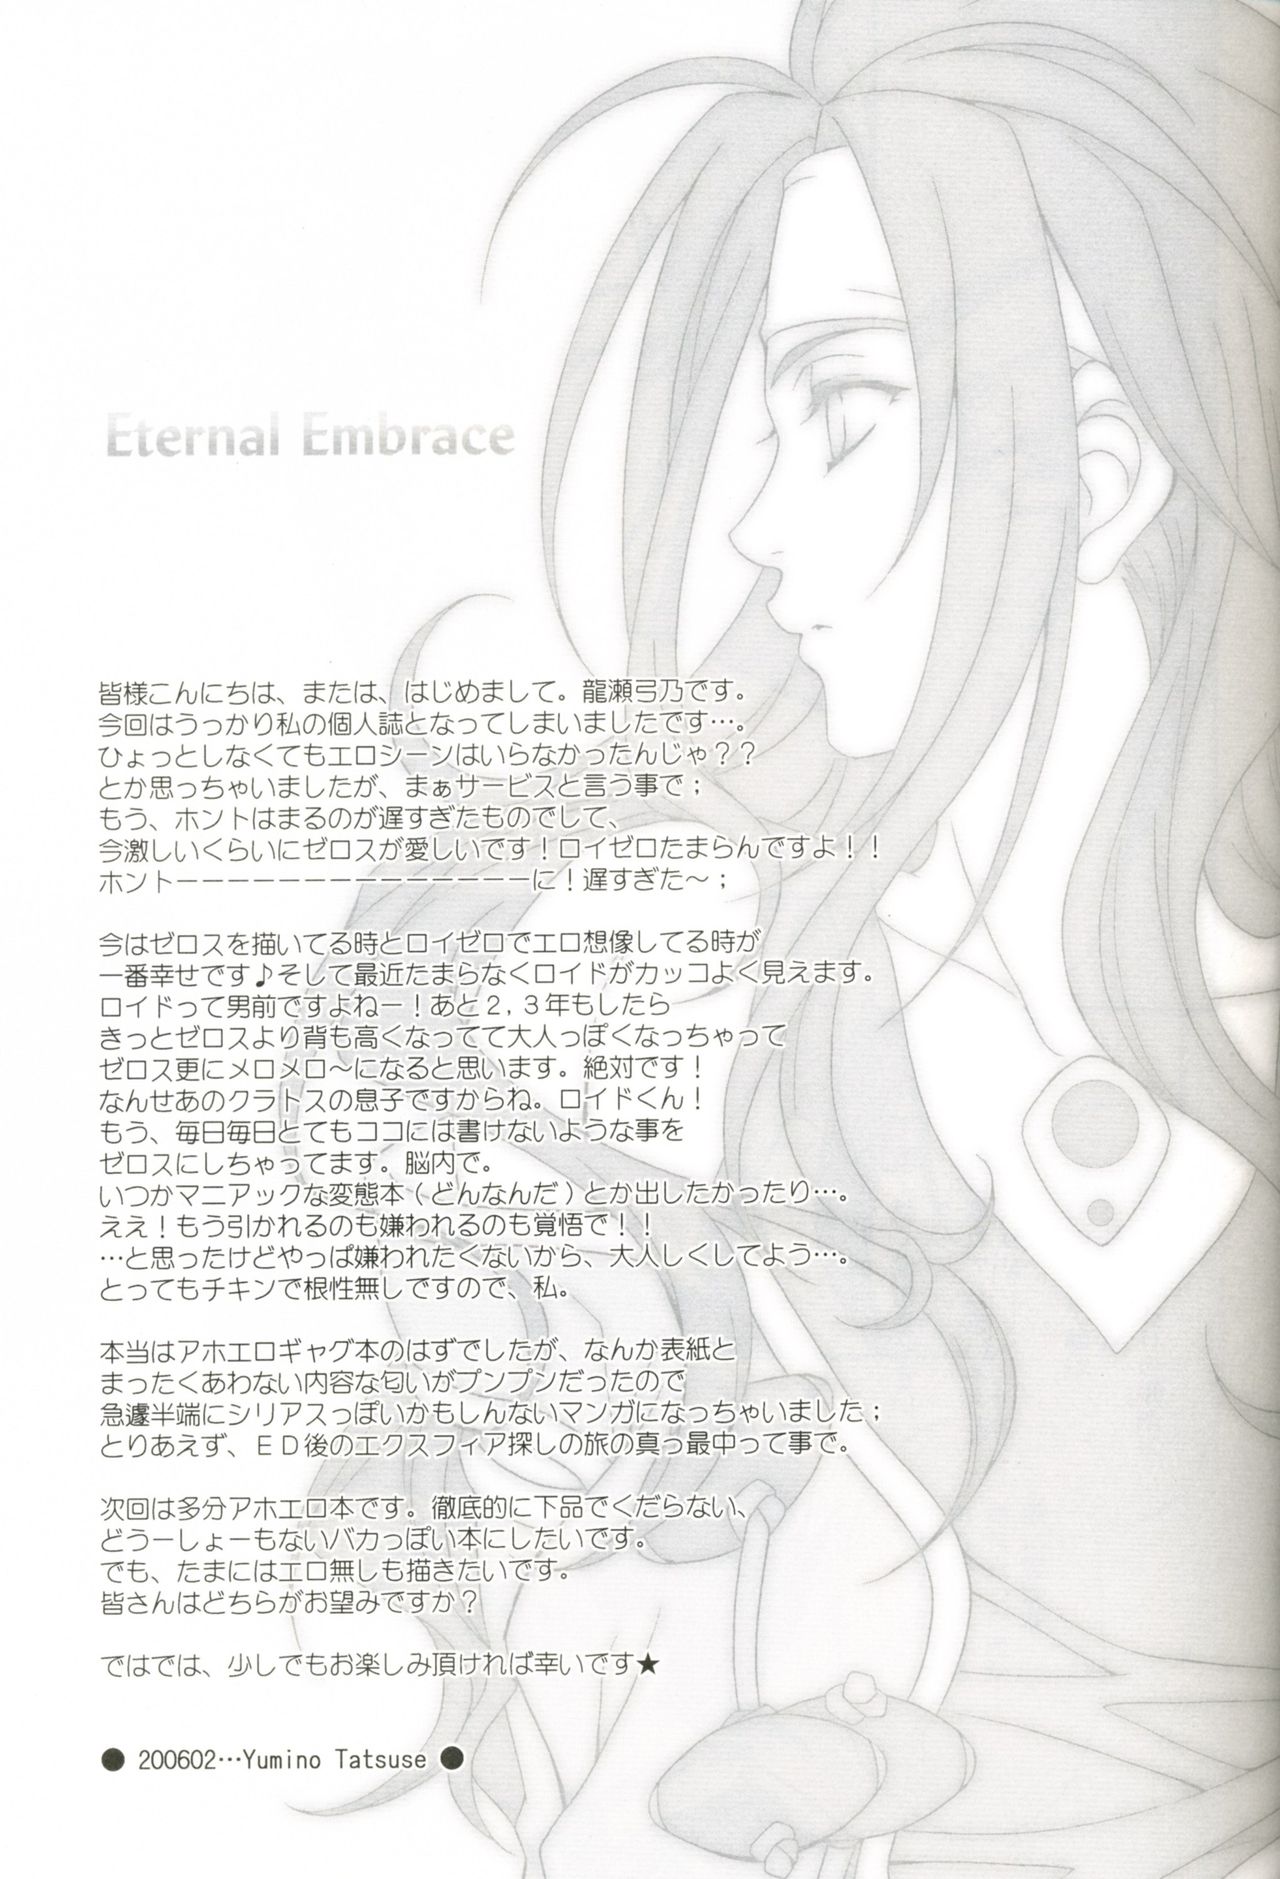 [PINK POWER (Tatsuse Yumino)] Eternal Embrace (Tales of Symphonia) [English] [Rimie and Ifa] [PINK POWER (龍瀬弓乃)] Eternal Embrace (テイルズ オブ シンフォニア) [英訳]